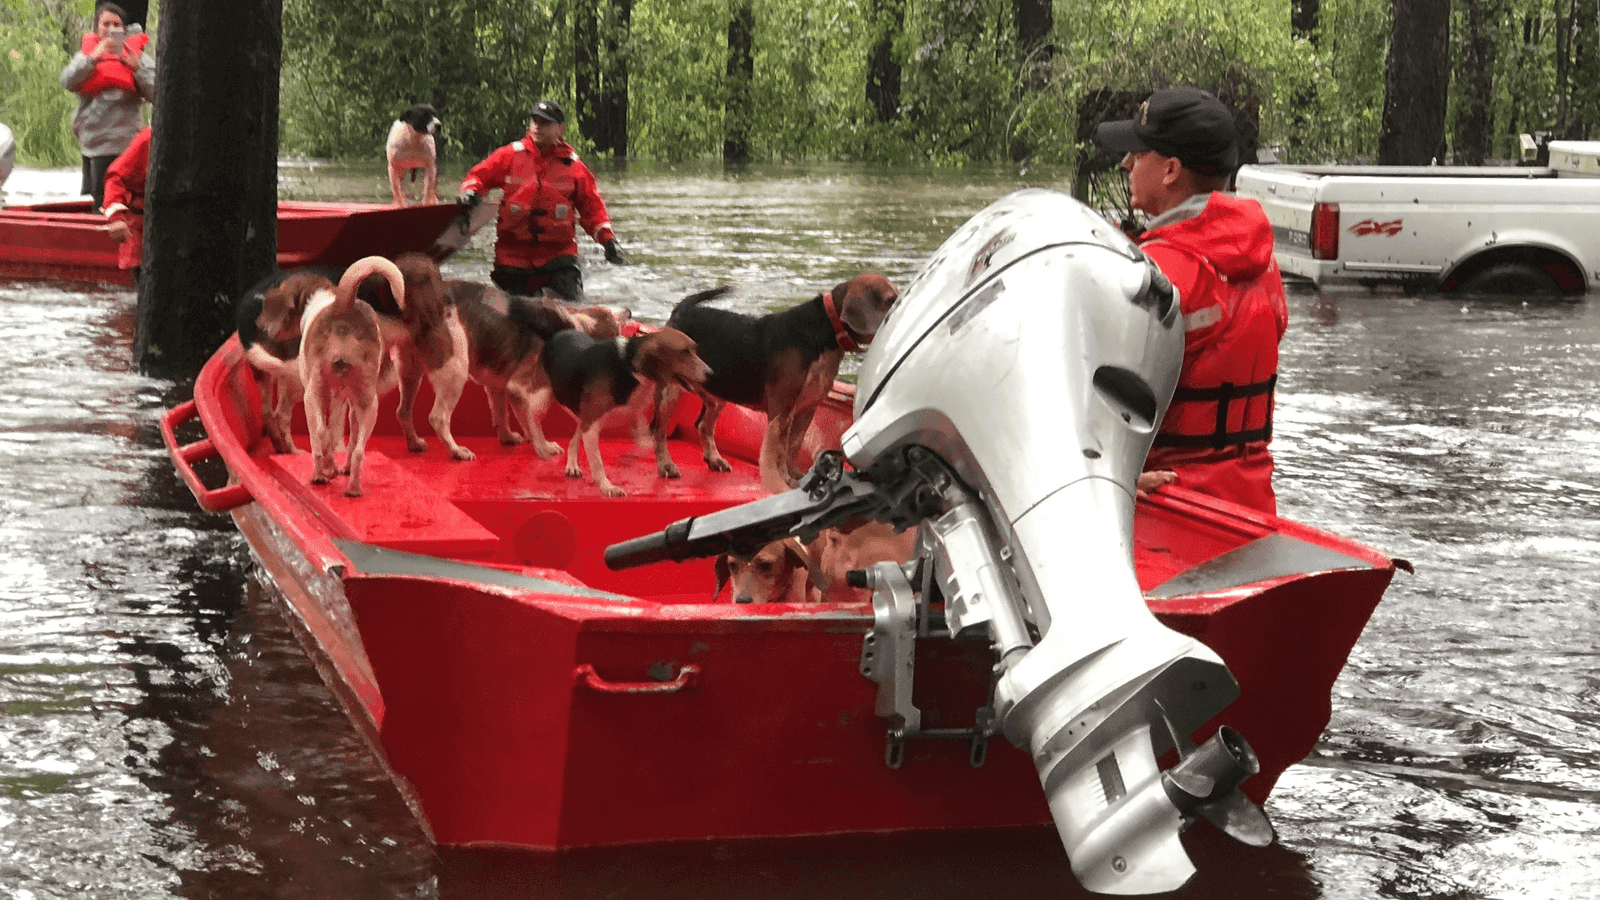 boats rescue pets from a flood